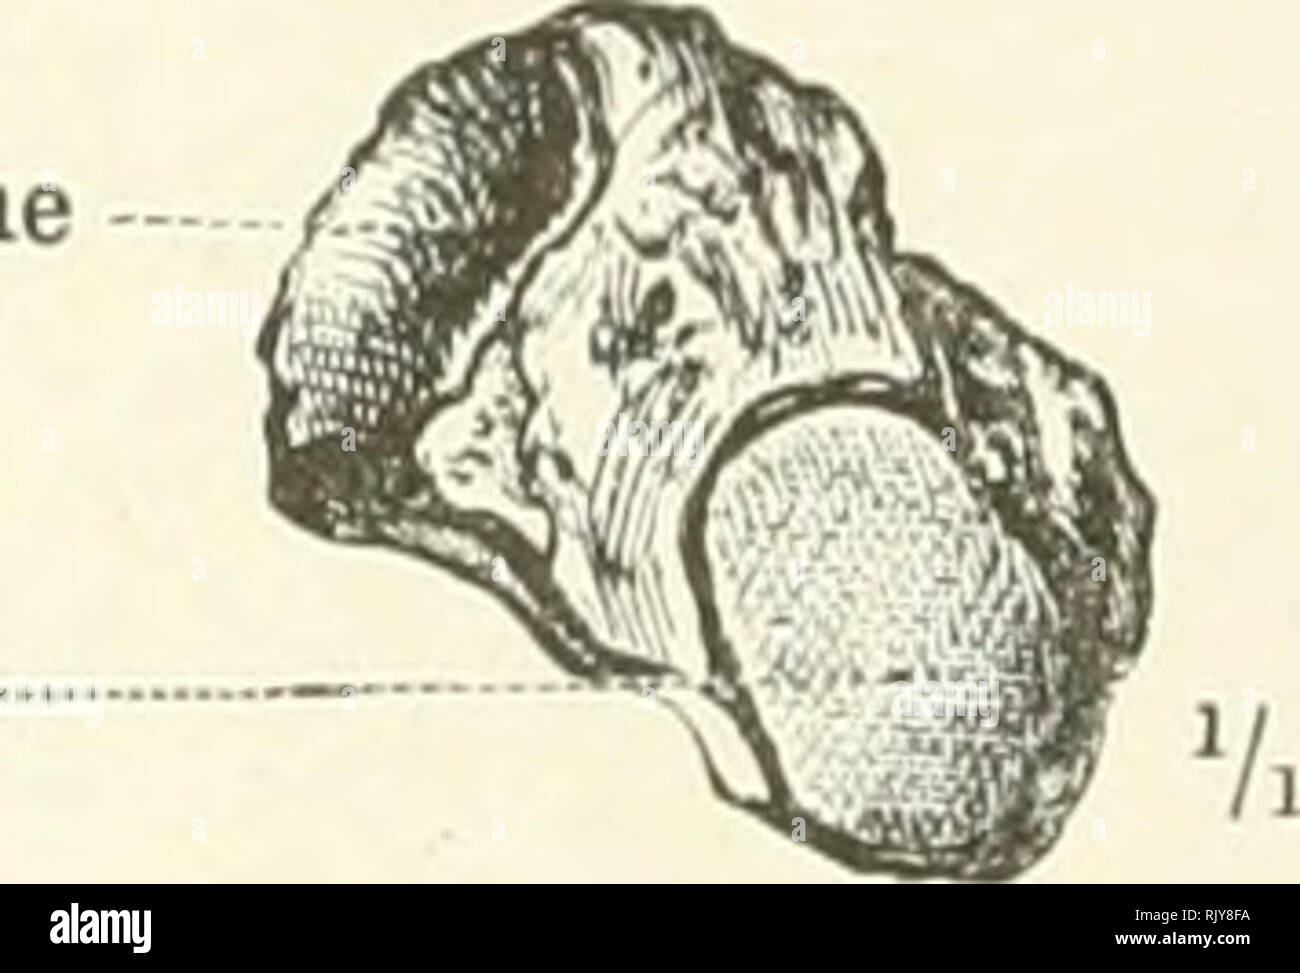 . An atlas of human anatomy for students and physicians. Anatomy. Articular facet for the lunar bone Articular facet for the pisiform bone. Fig. 283.—Radial Aspect. Fig. 284.—Palmar Aspect. Os Triquetrum—The Right Pyramidal or Cuneiform Bone. V. Articular facet for the pyramidal or cuneiform bona Fig. 285.—Palmar Aspect. Fig. 286.—Posterior Aspect. Os Pisiforme—The Right Pisiform Bone. Lunar (or semilunar) bone Os lunatum Pyramidal or cuneiform bone Os triquetrum Pisiform bone Os pisiforme Unciform bone Os hamatum Os magnum, or capitate bone Os capitatum. Please note that these images are extr Stock Photo